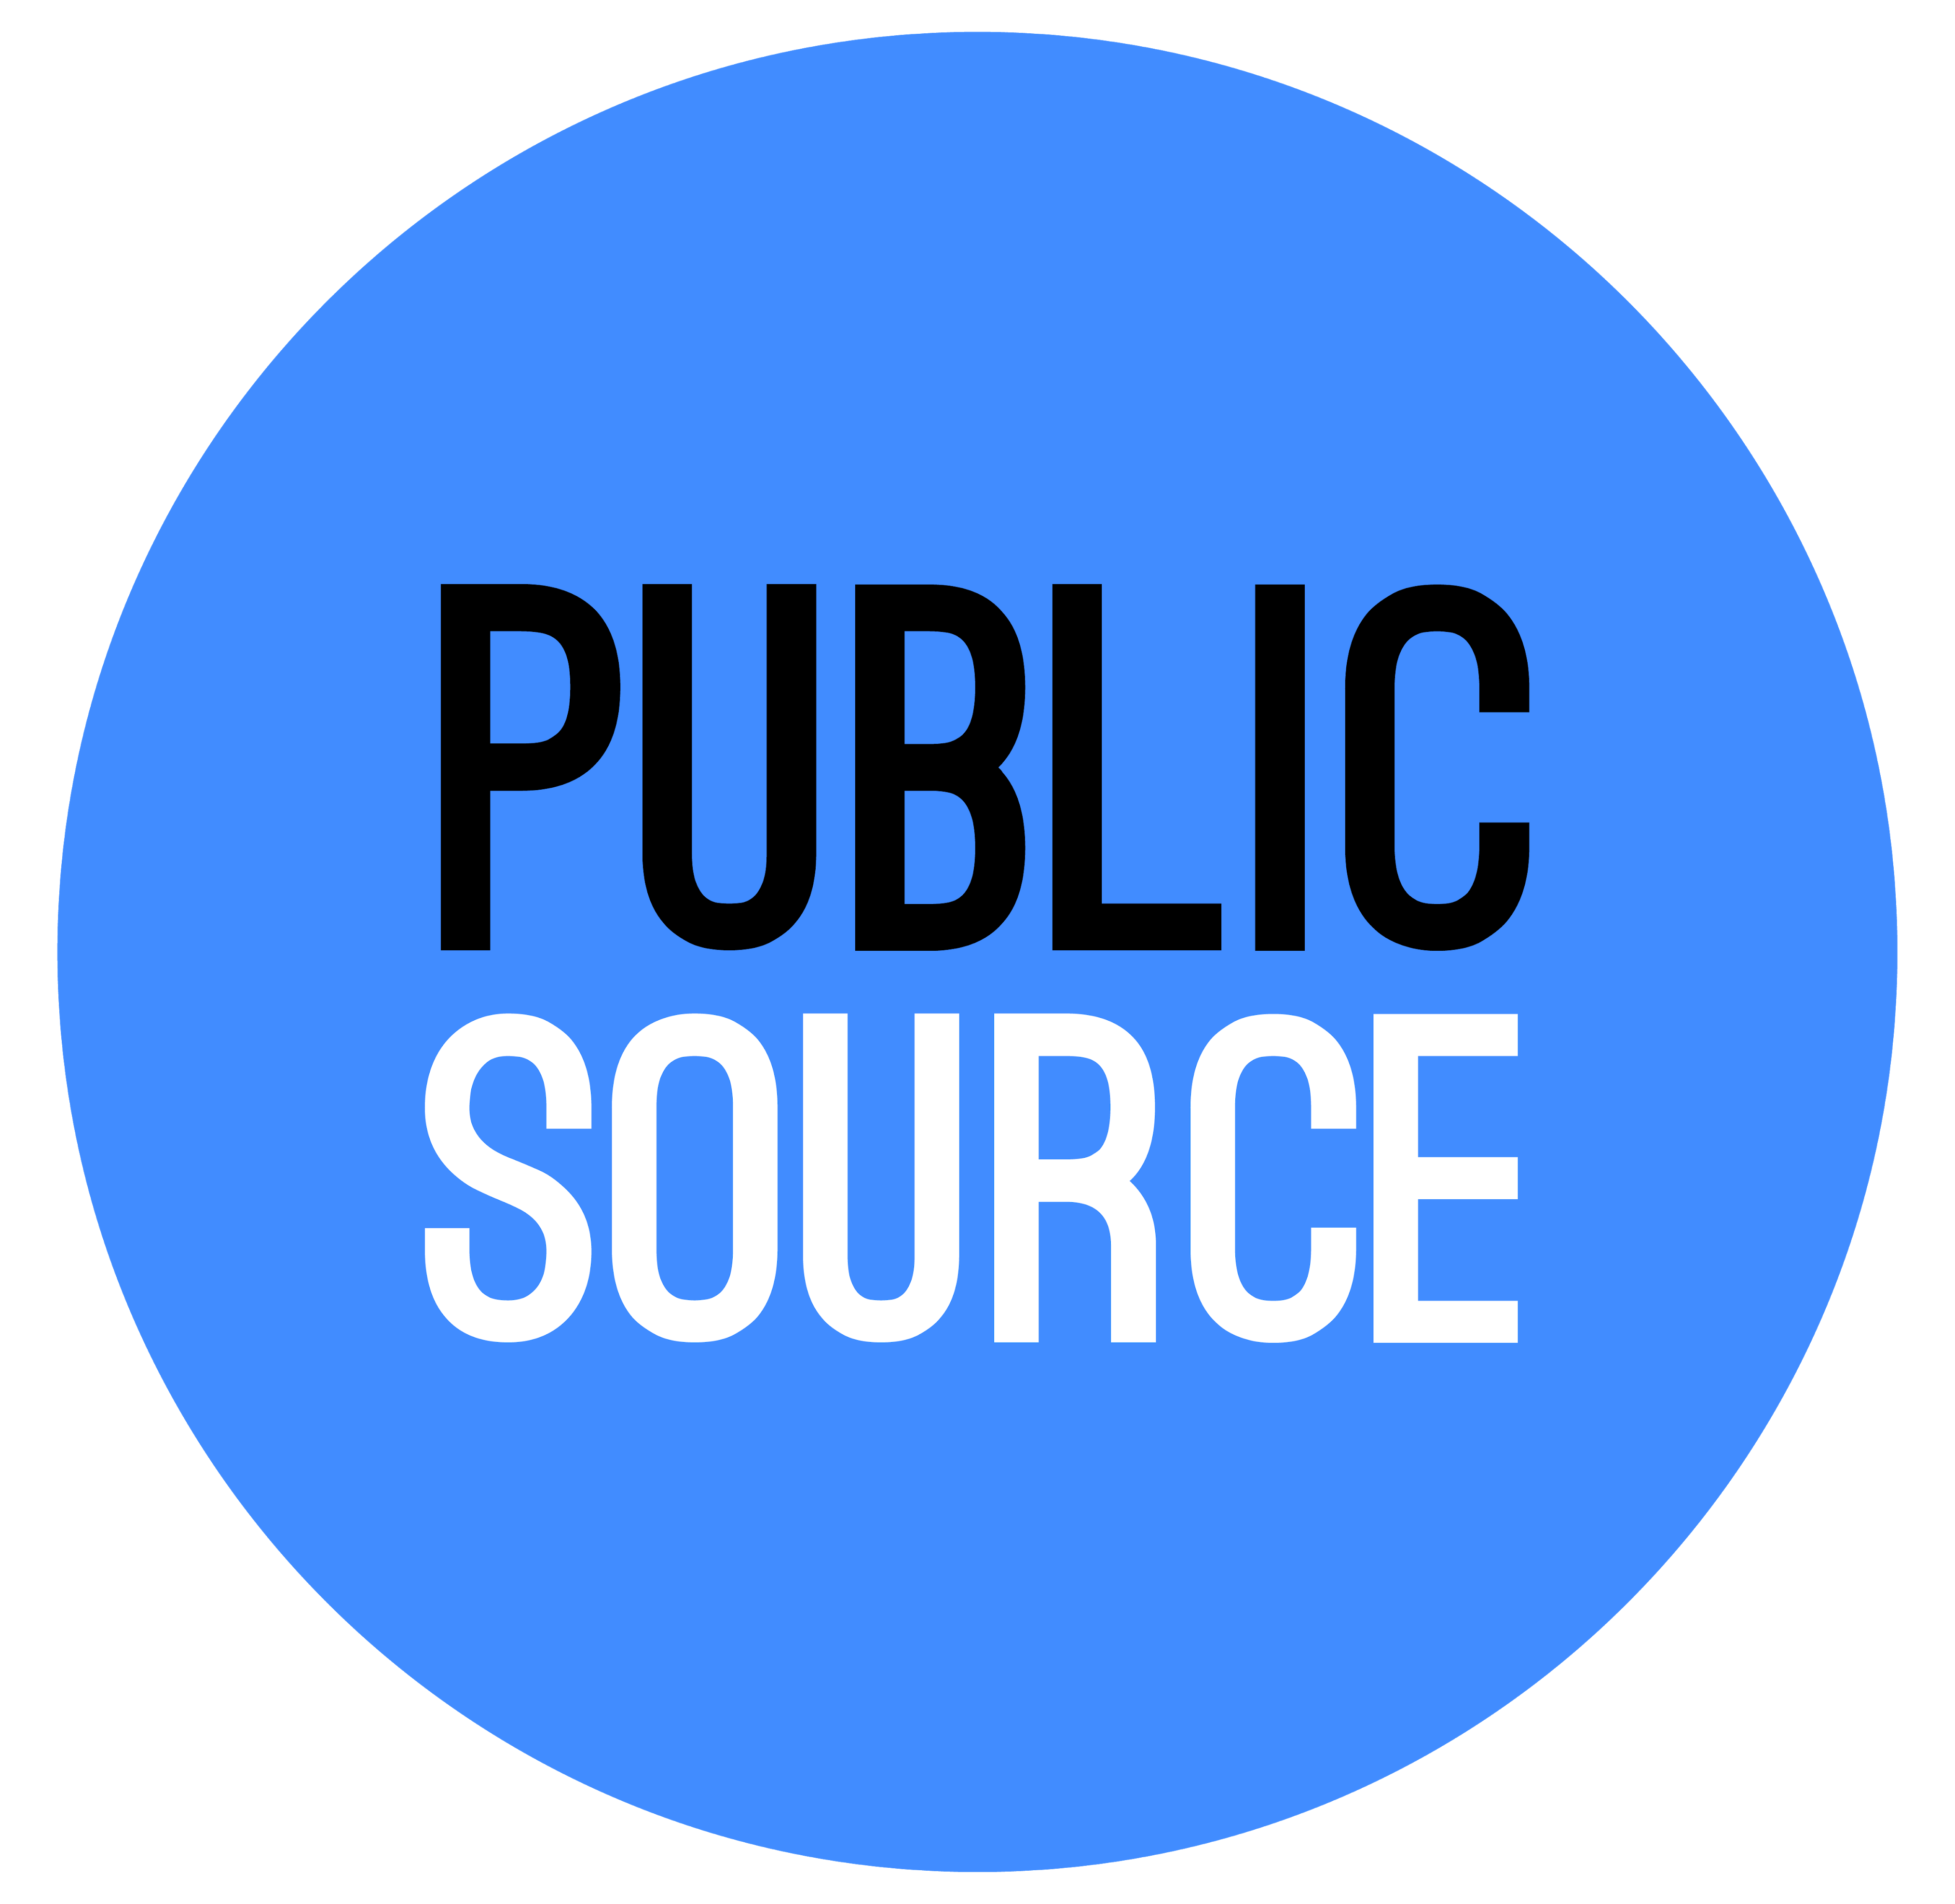 http://PublicSource%20logo,%20a%20blue%20circle%20with%20capitalized%20PUBLIC%20in%20black%20with%20capitalized%20SOURCE%20in%20white.